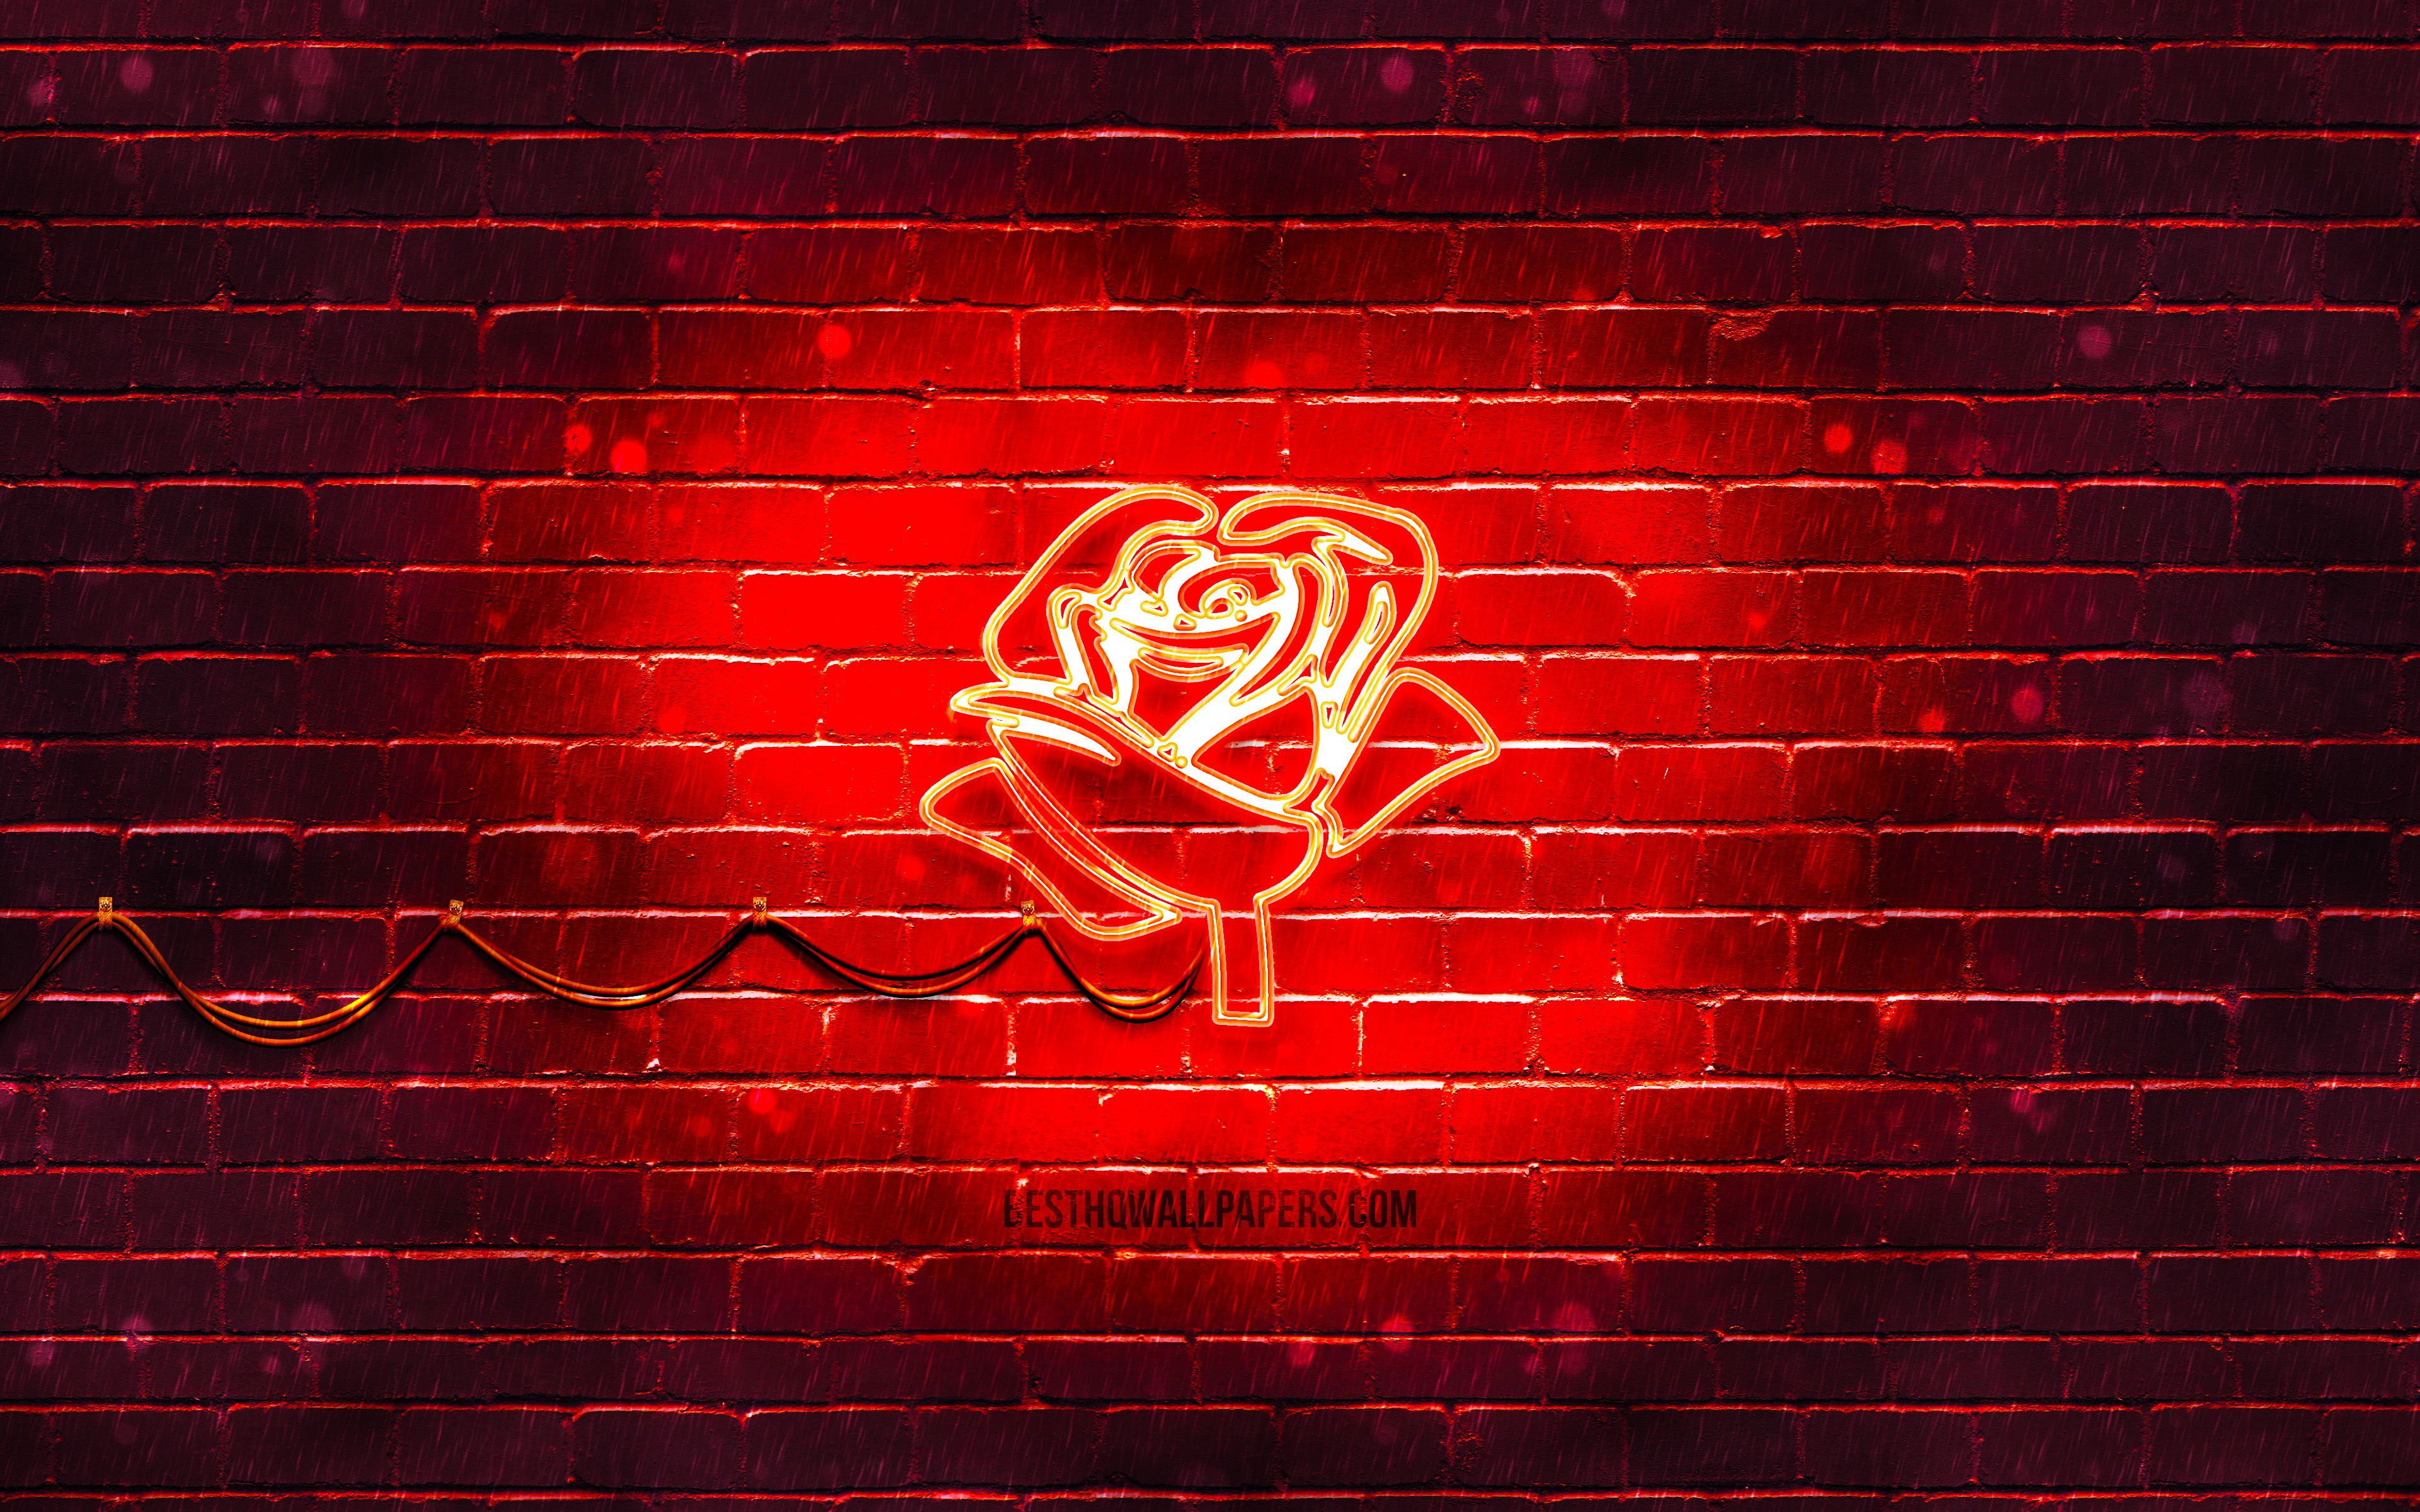 Download wallpaper Red Rose neon icon, 4k, red background, neon symbols, Red Rose, neon icons, Red Rose sign, neon flowers, nature signs, Red Rose icon, nature icons for desktop with resolution 3840x2400